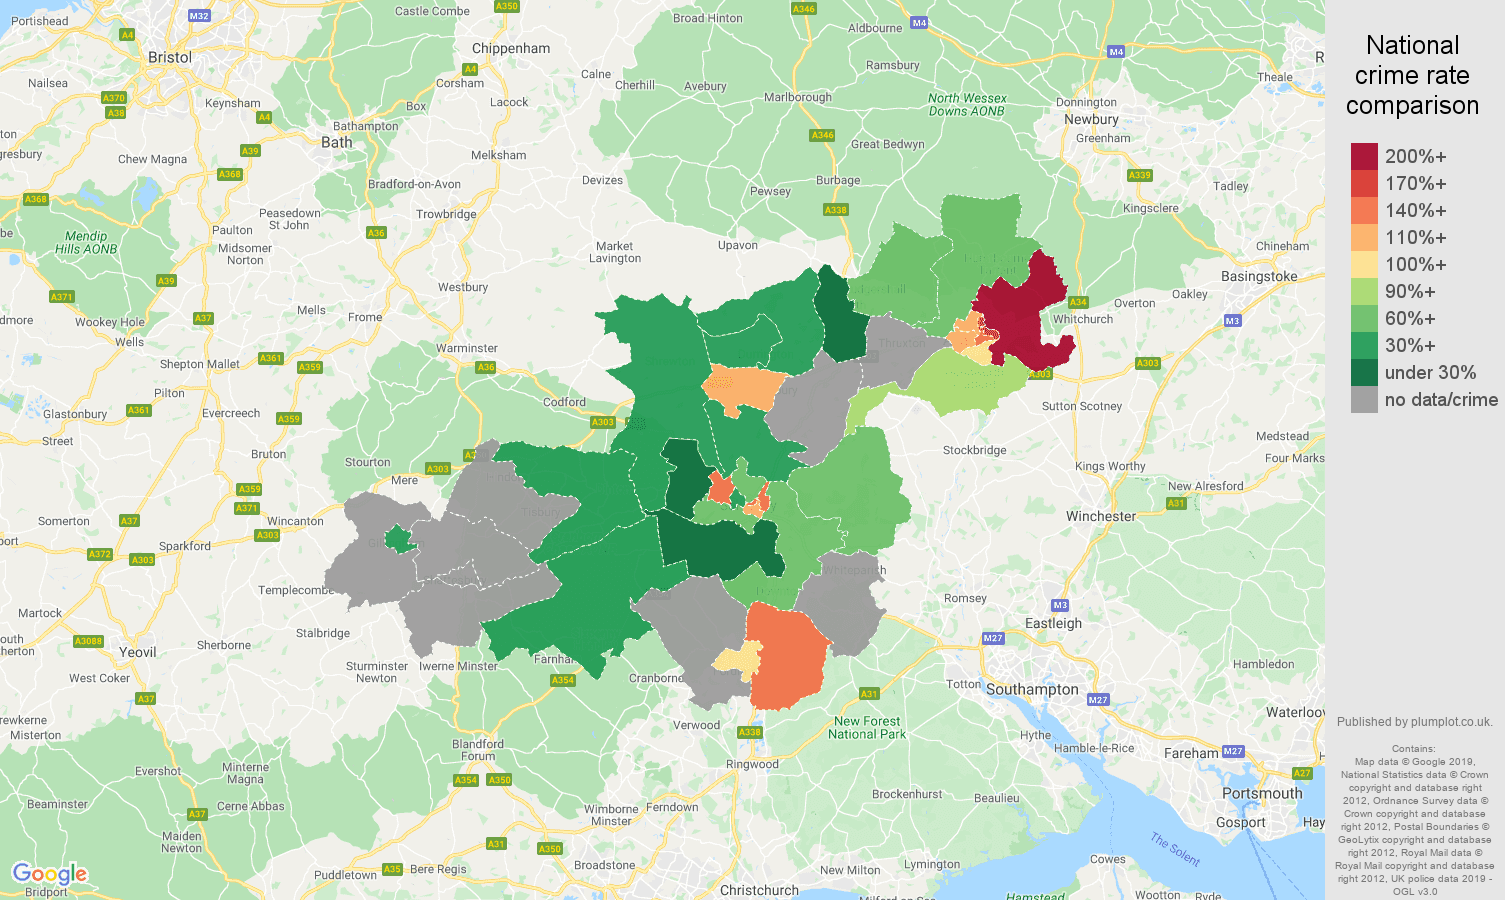 Salisbury possession of weapons crime rate comparison map